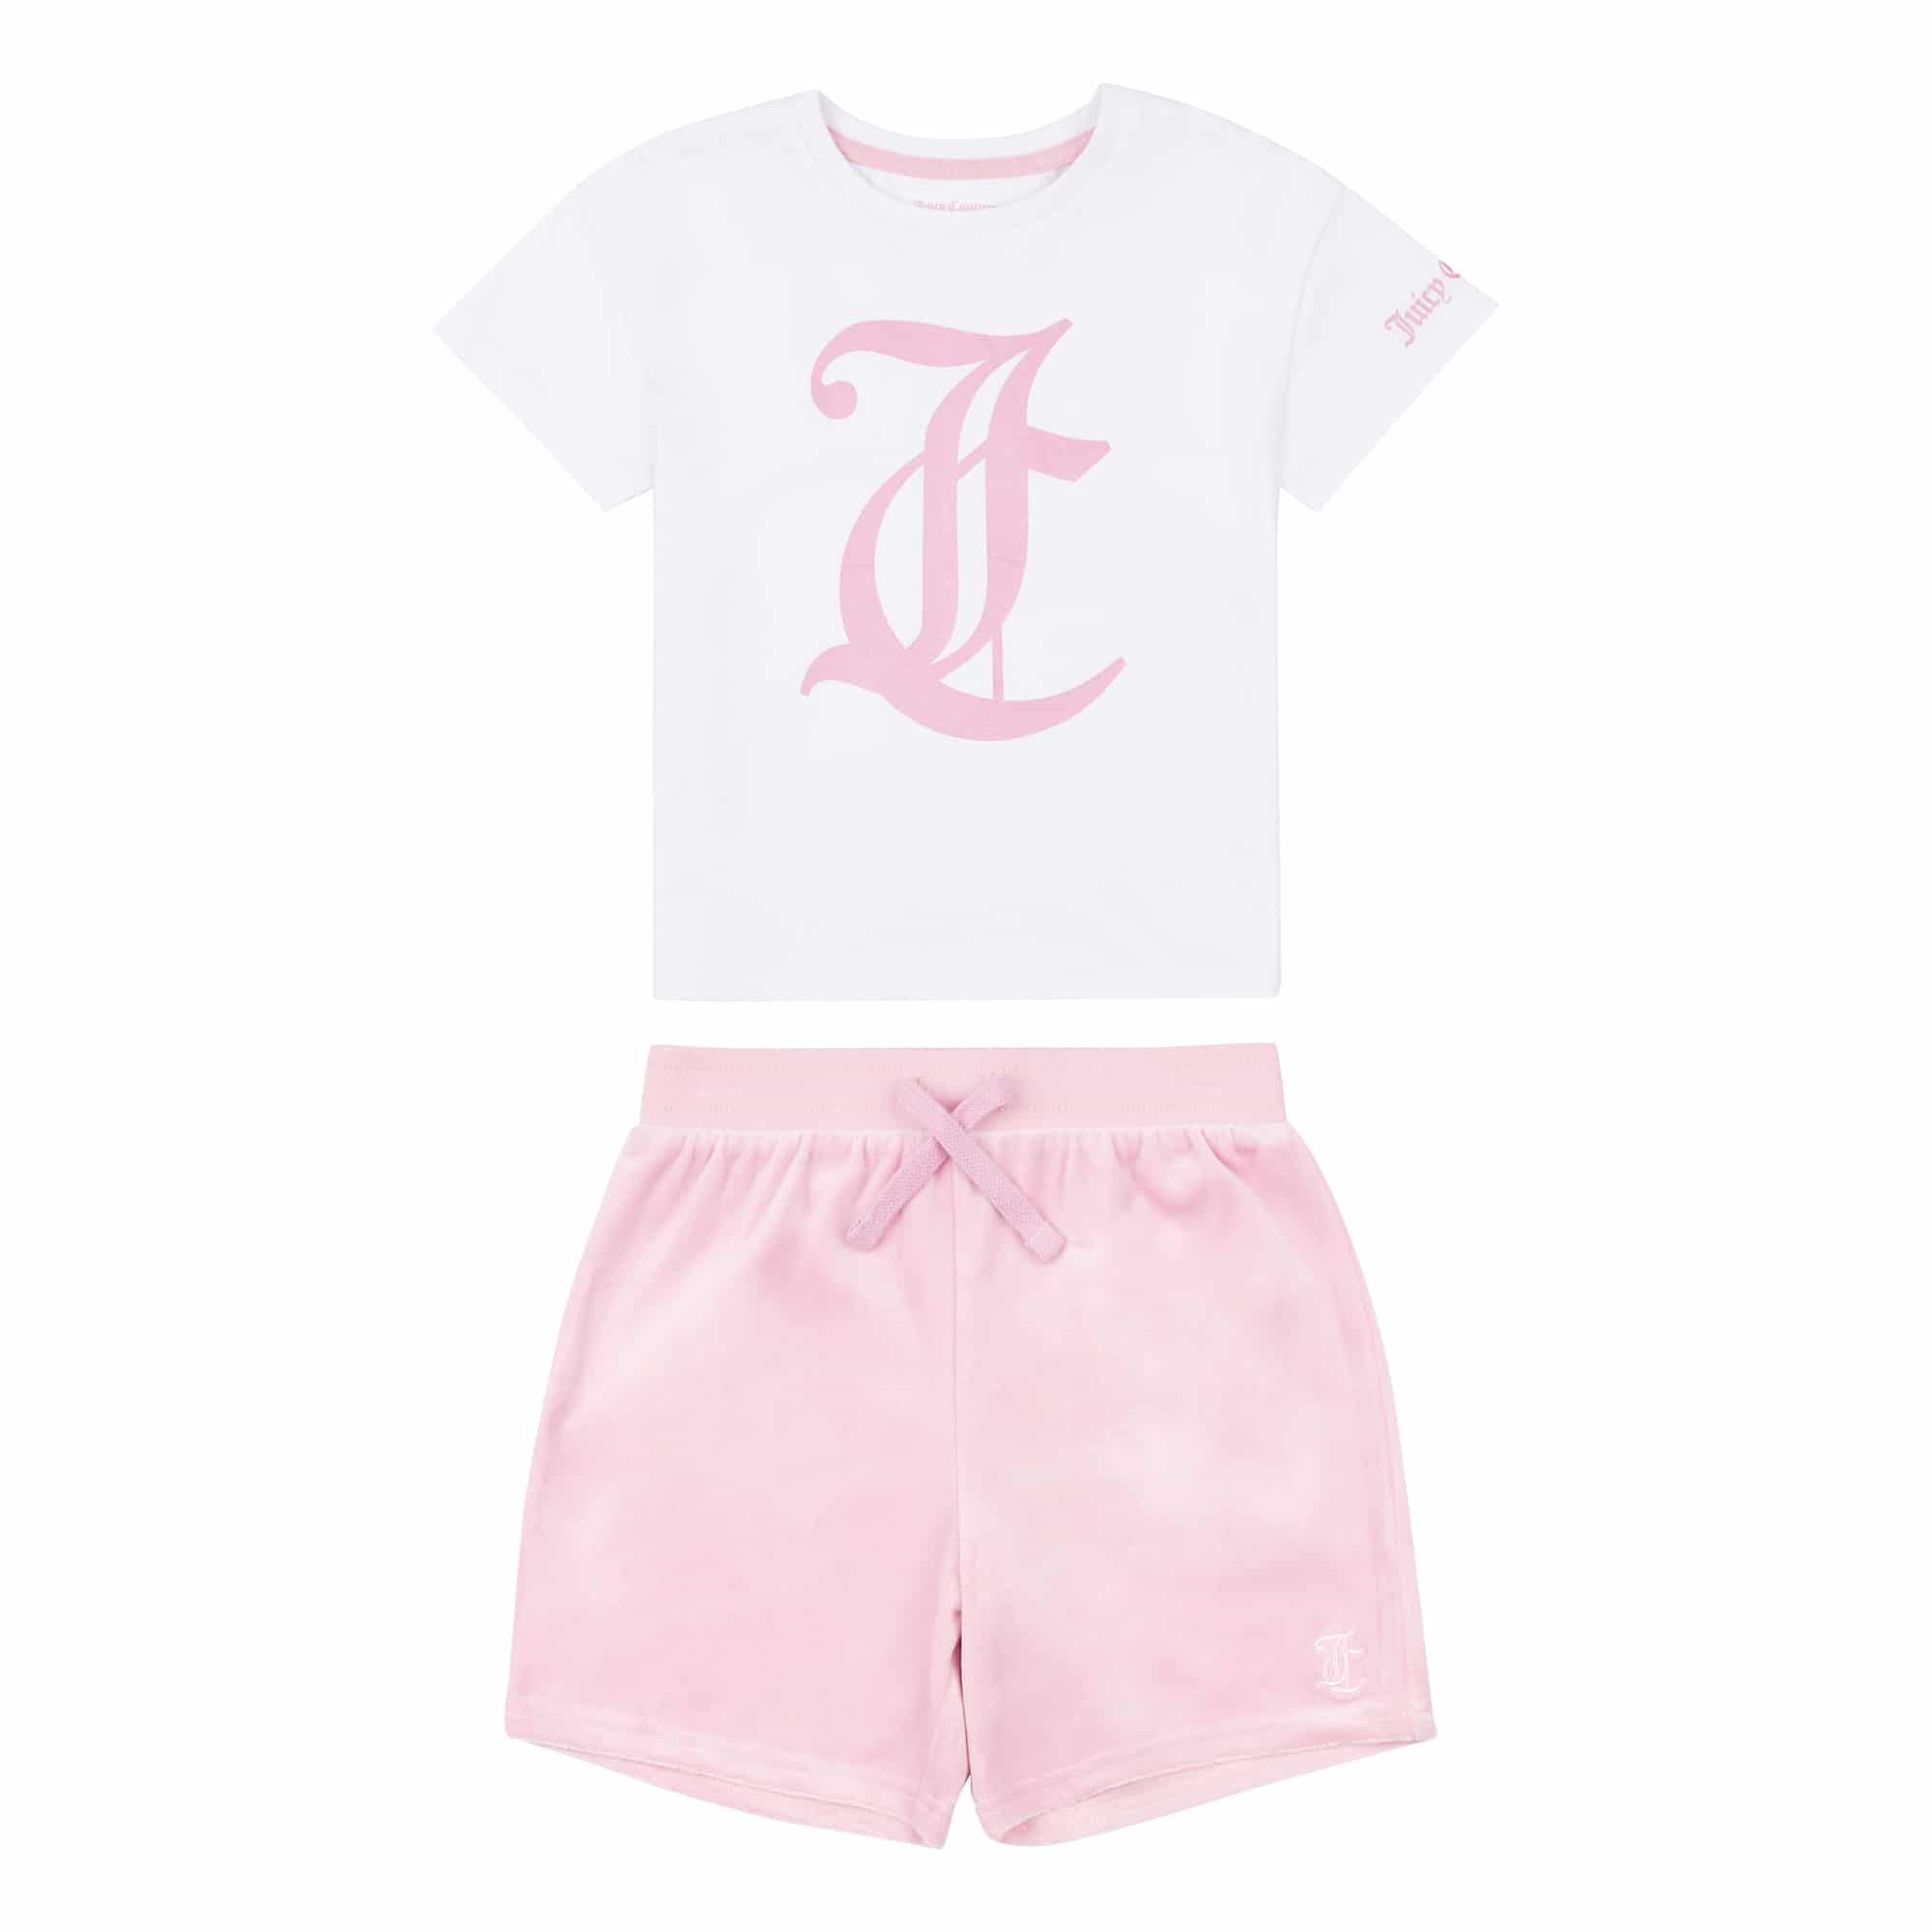 Juicy couture pink shorts and white tee front view